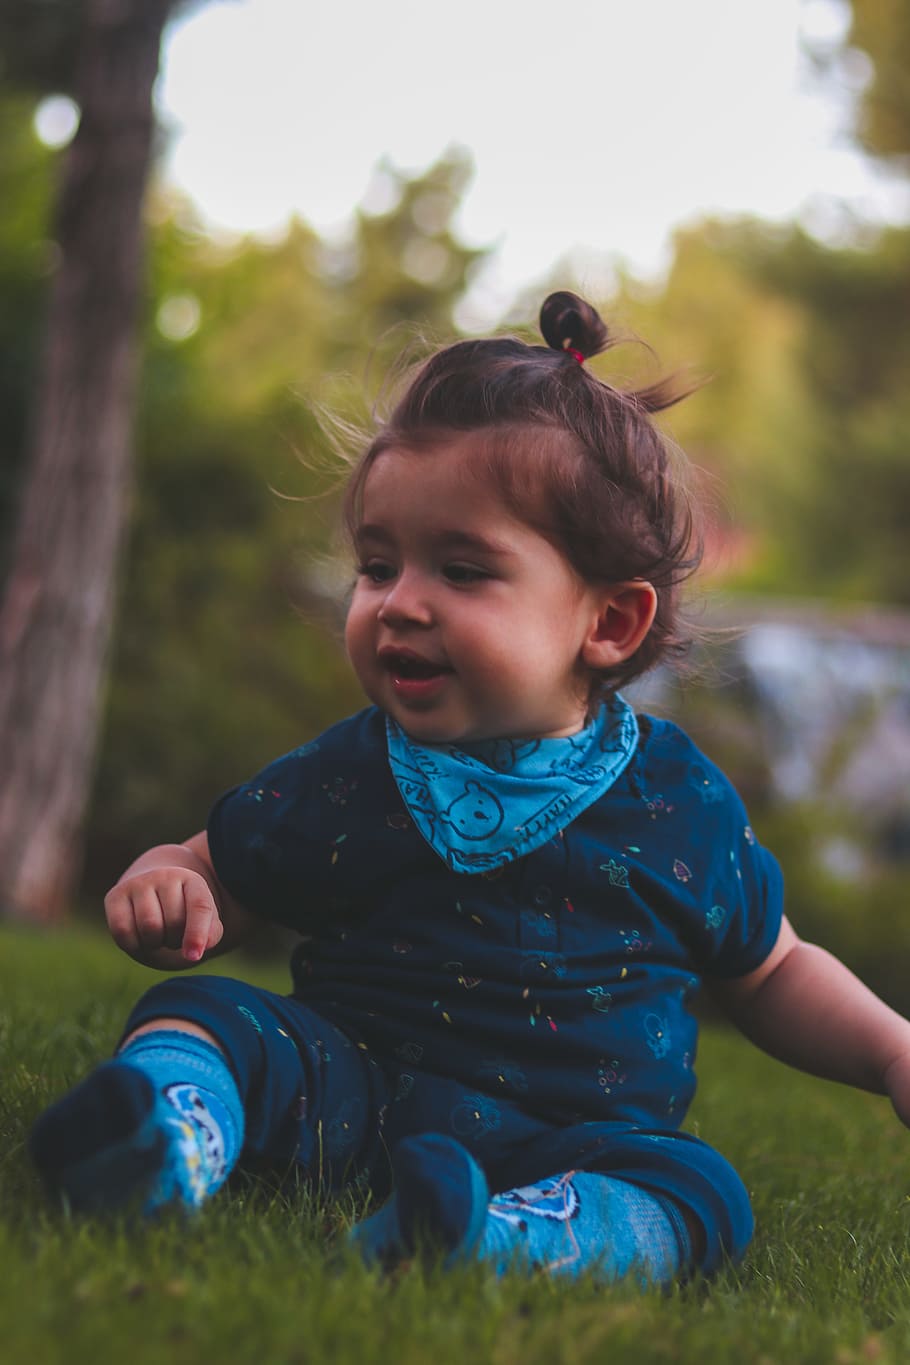 Photo of Baby Wearing Blue Onesie and Socks Sitting on Green Grass